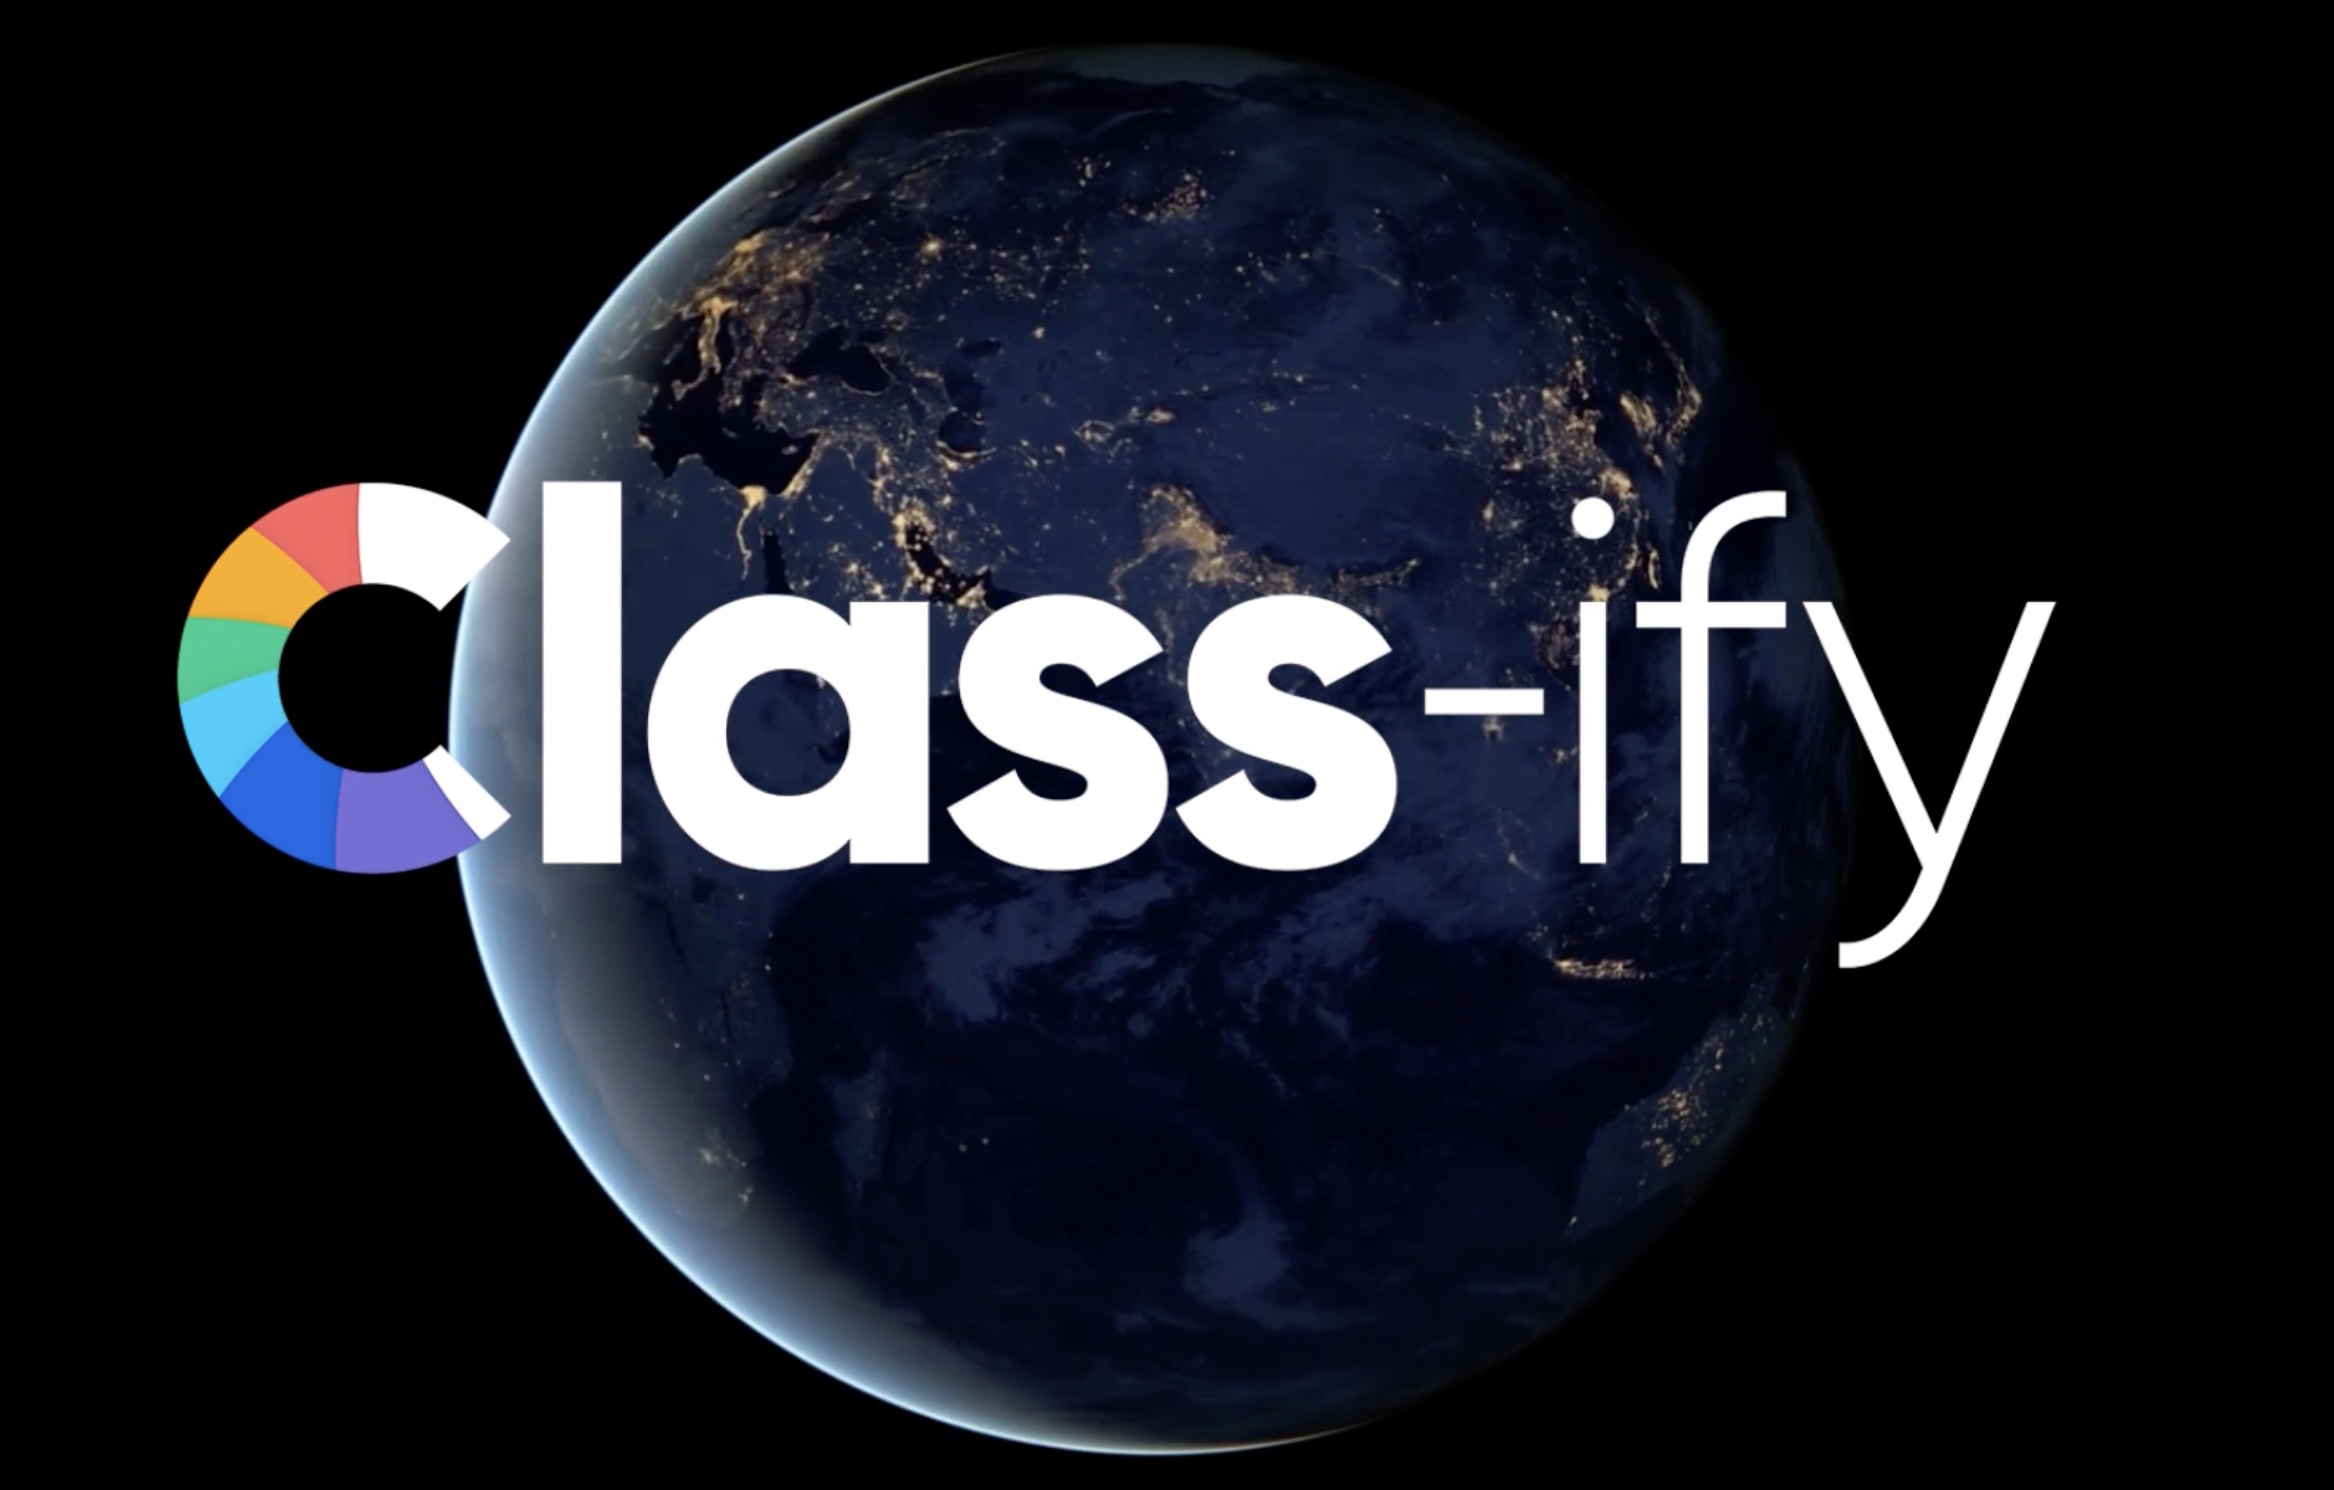 AMA: Tristan Rushworth, co-founder of Class-ify